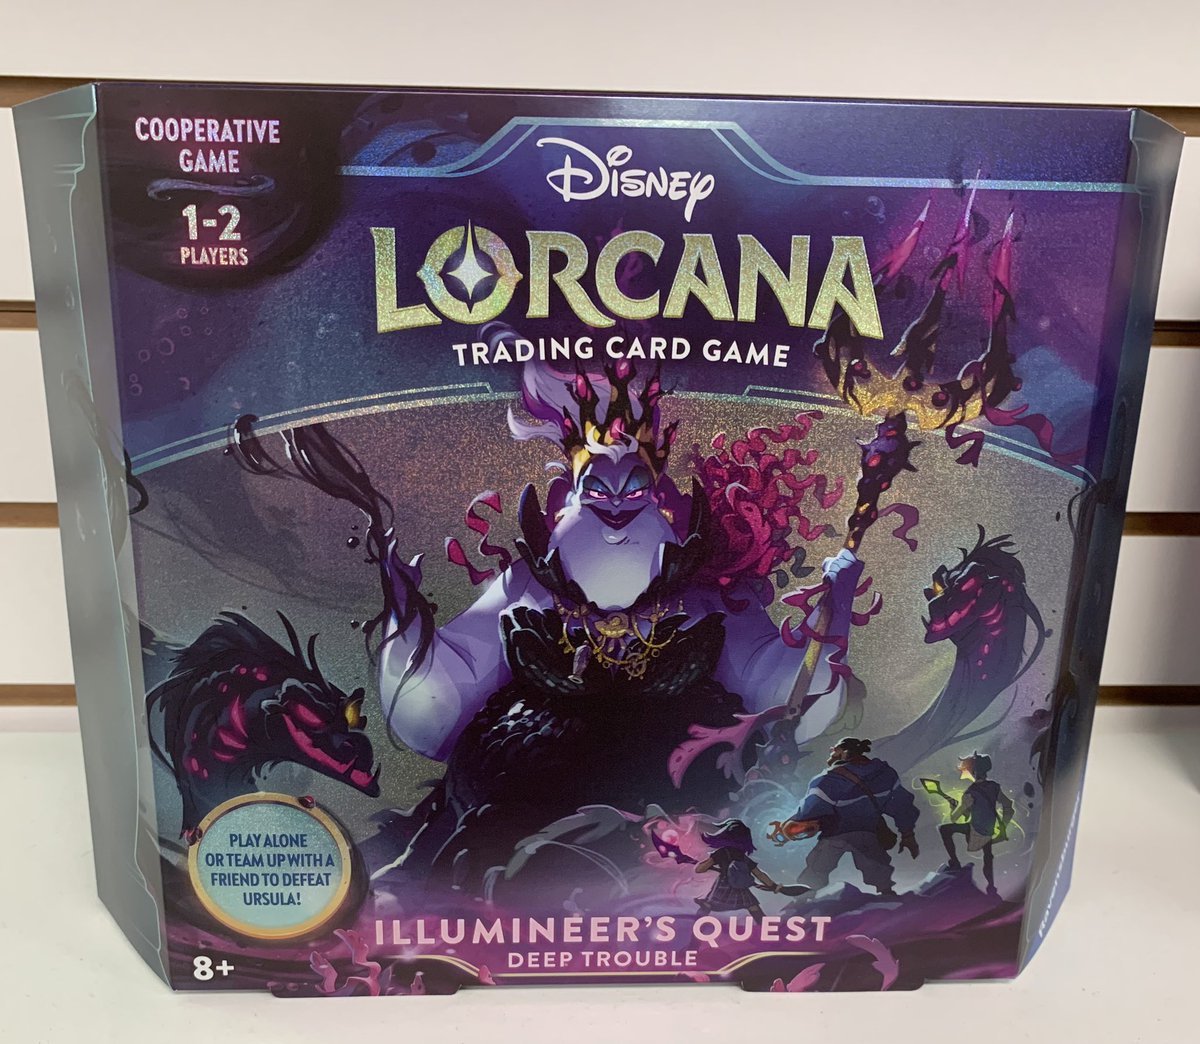 Just picked up the co-op Illumineer's Quest Lorcana set at @Poke_NOLA. They have a great selection of Lorcana items, and tons of Pokémon TCG merchandise. Glad to help support small local businesses. #StandOnBusiness